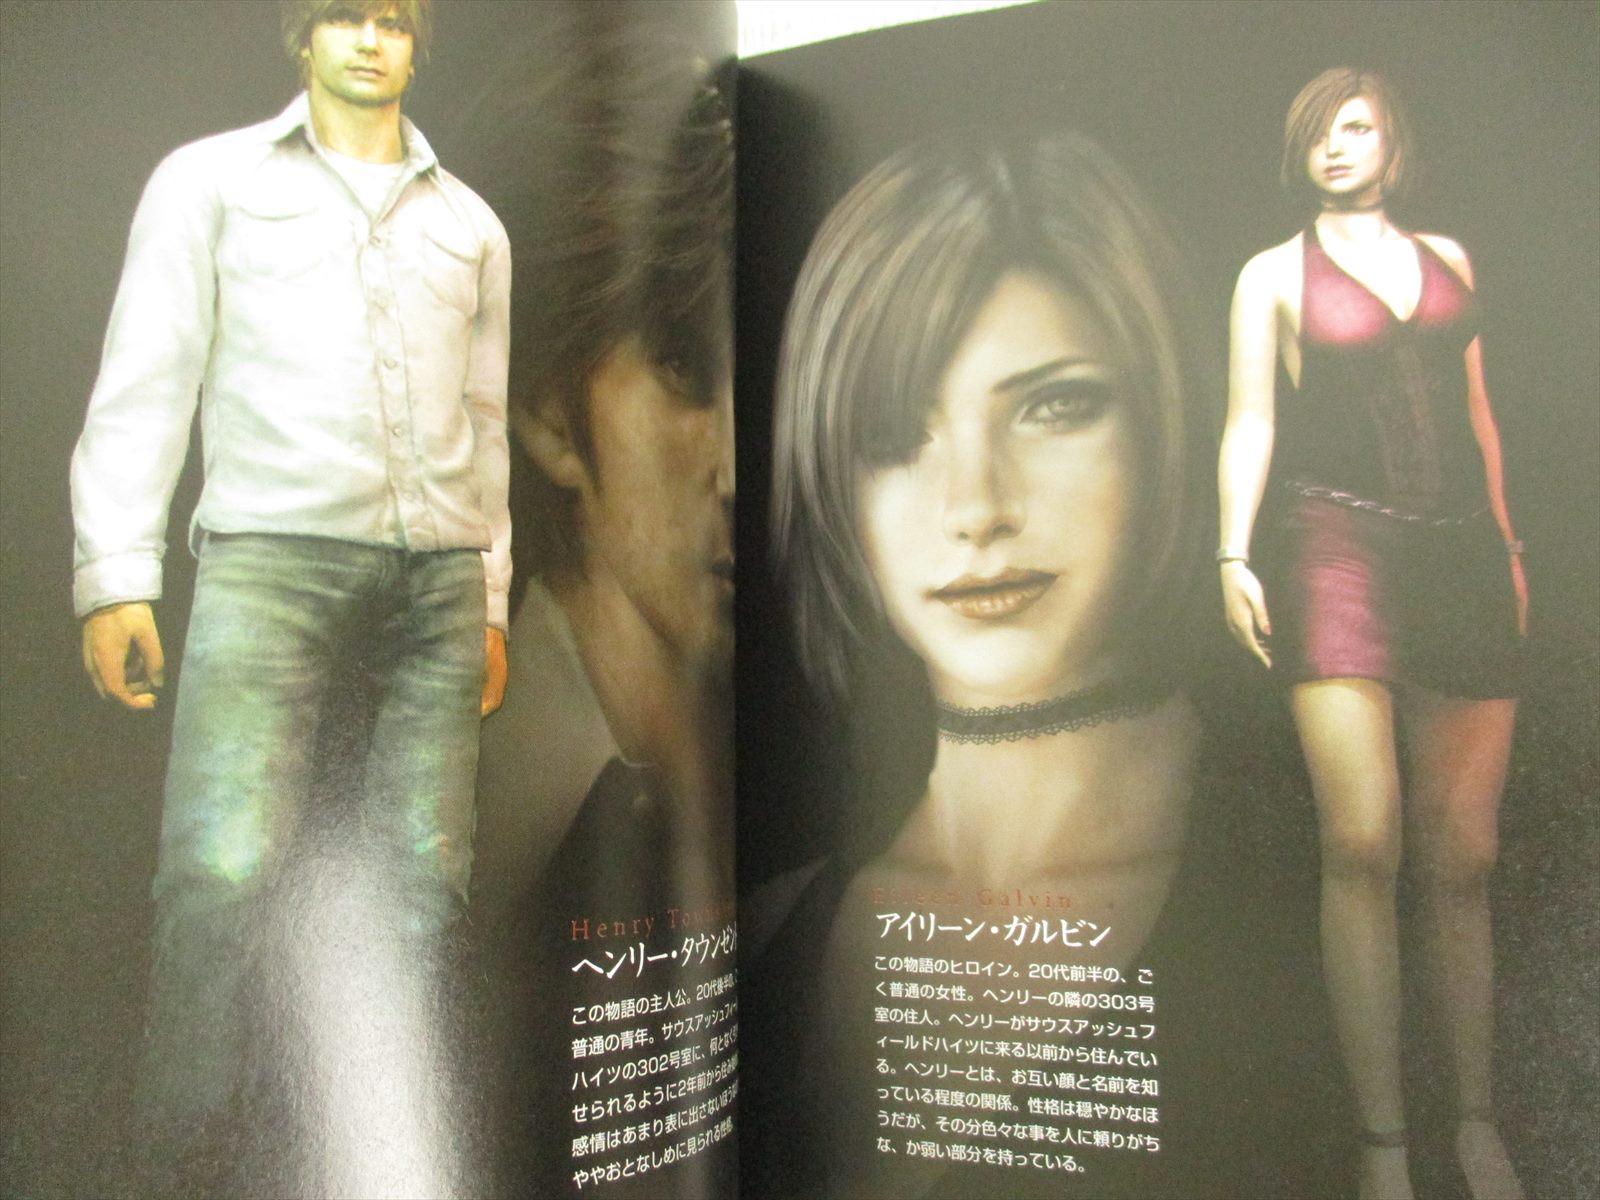 Silent Hill 4 The Room Official Guide 1st Ediit Ps2 Book Km84 Ebay